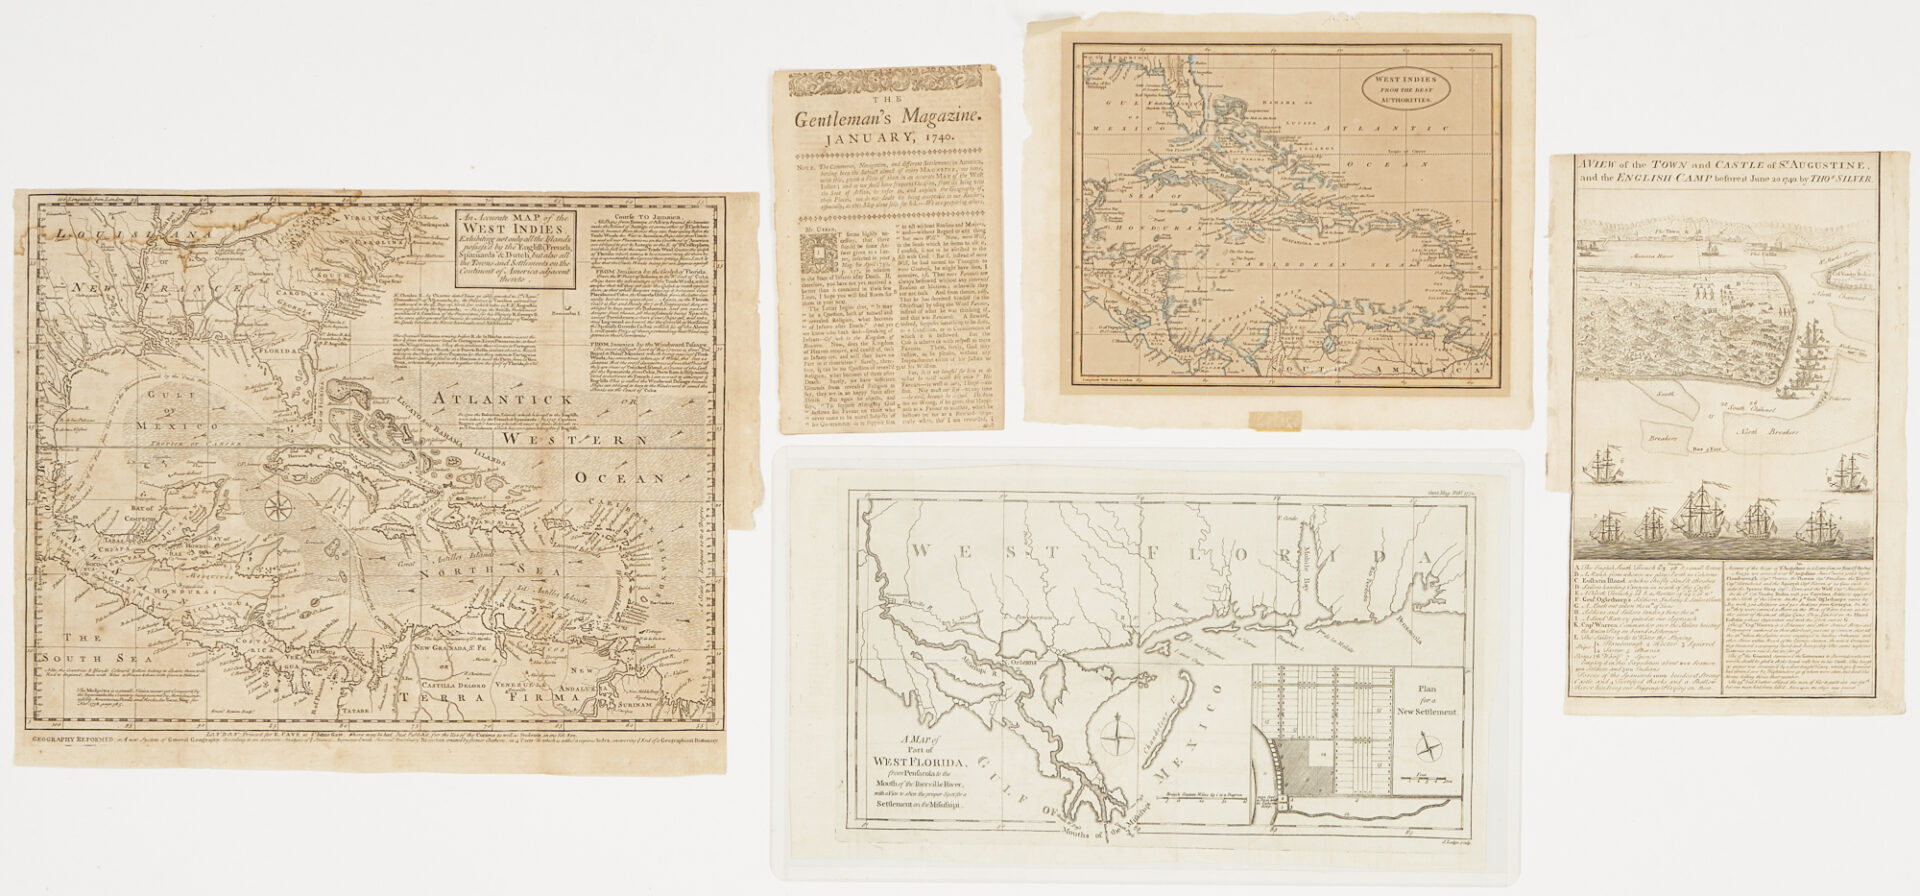 Lot 549: 4 Early Florida Maps, incl. St. Augustine & Bowen